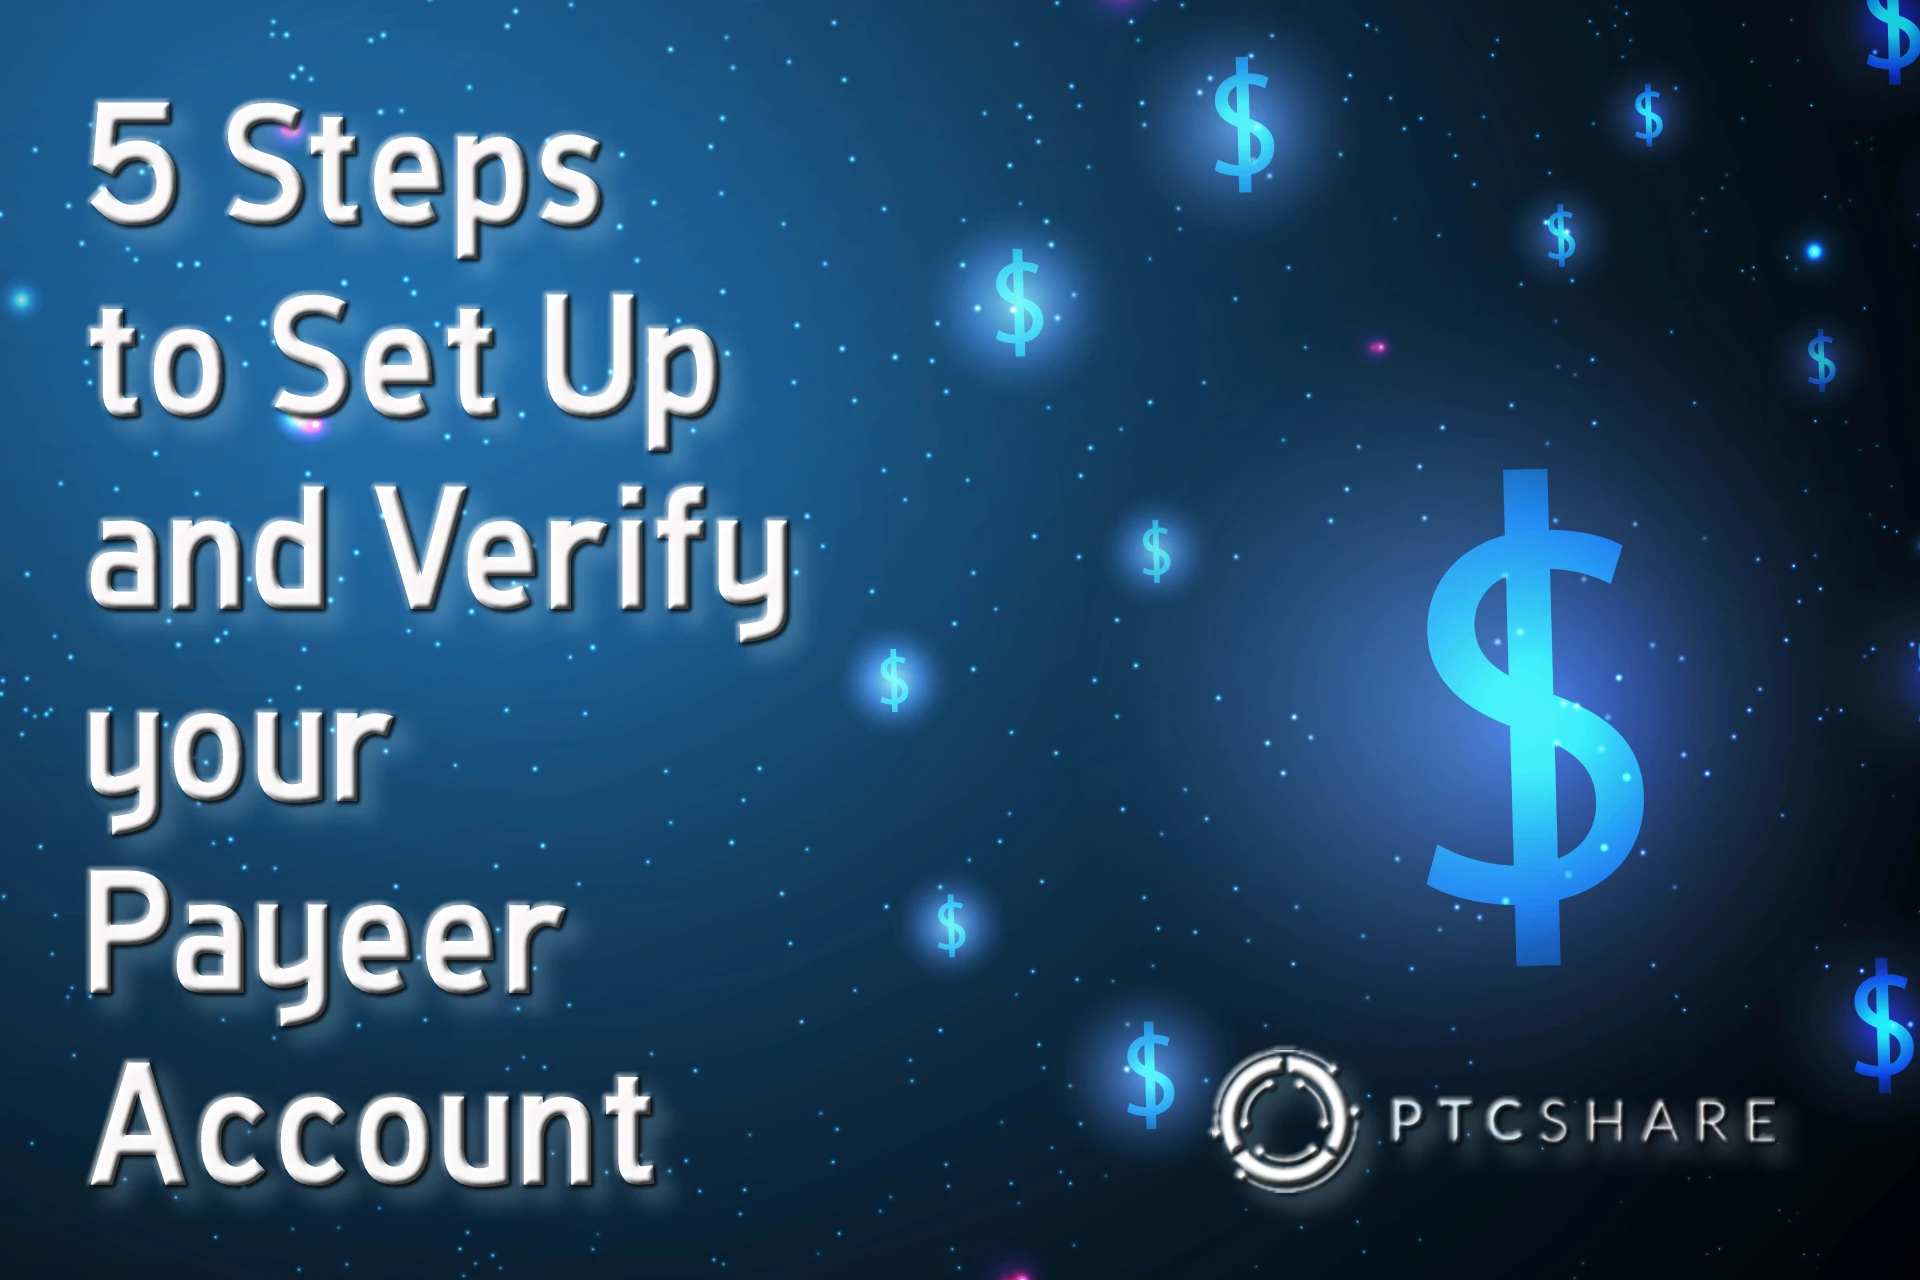 Your Payeer Account: How to Set Up and Verify in 5 Easy Steps